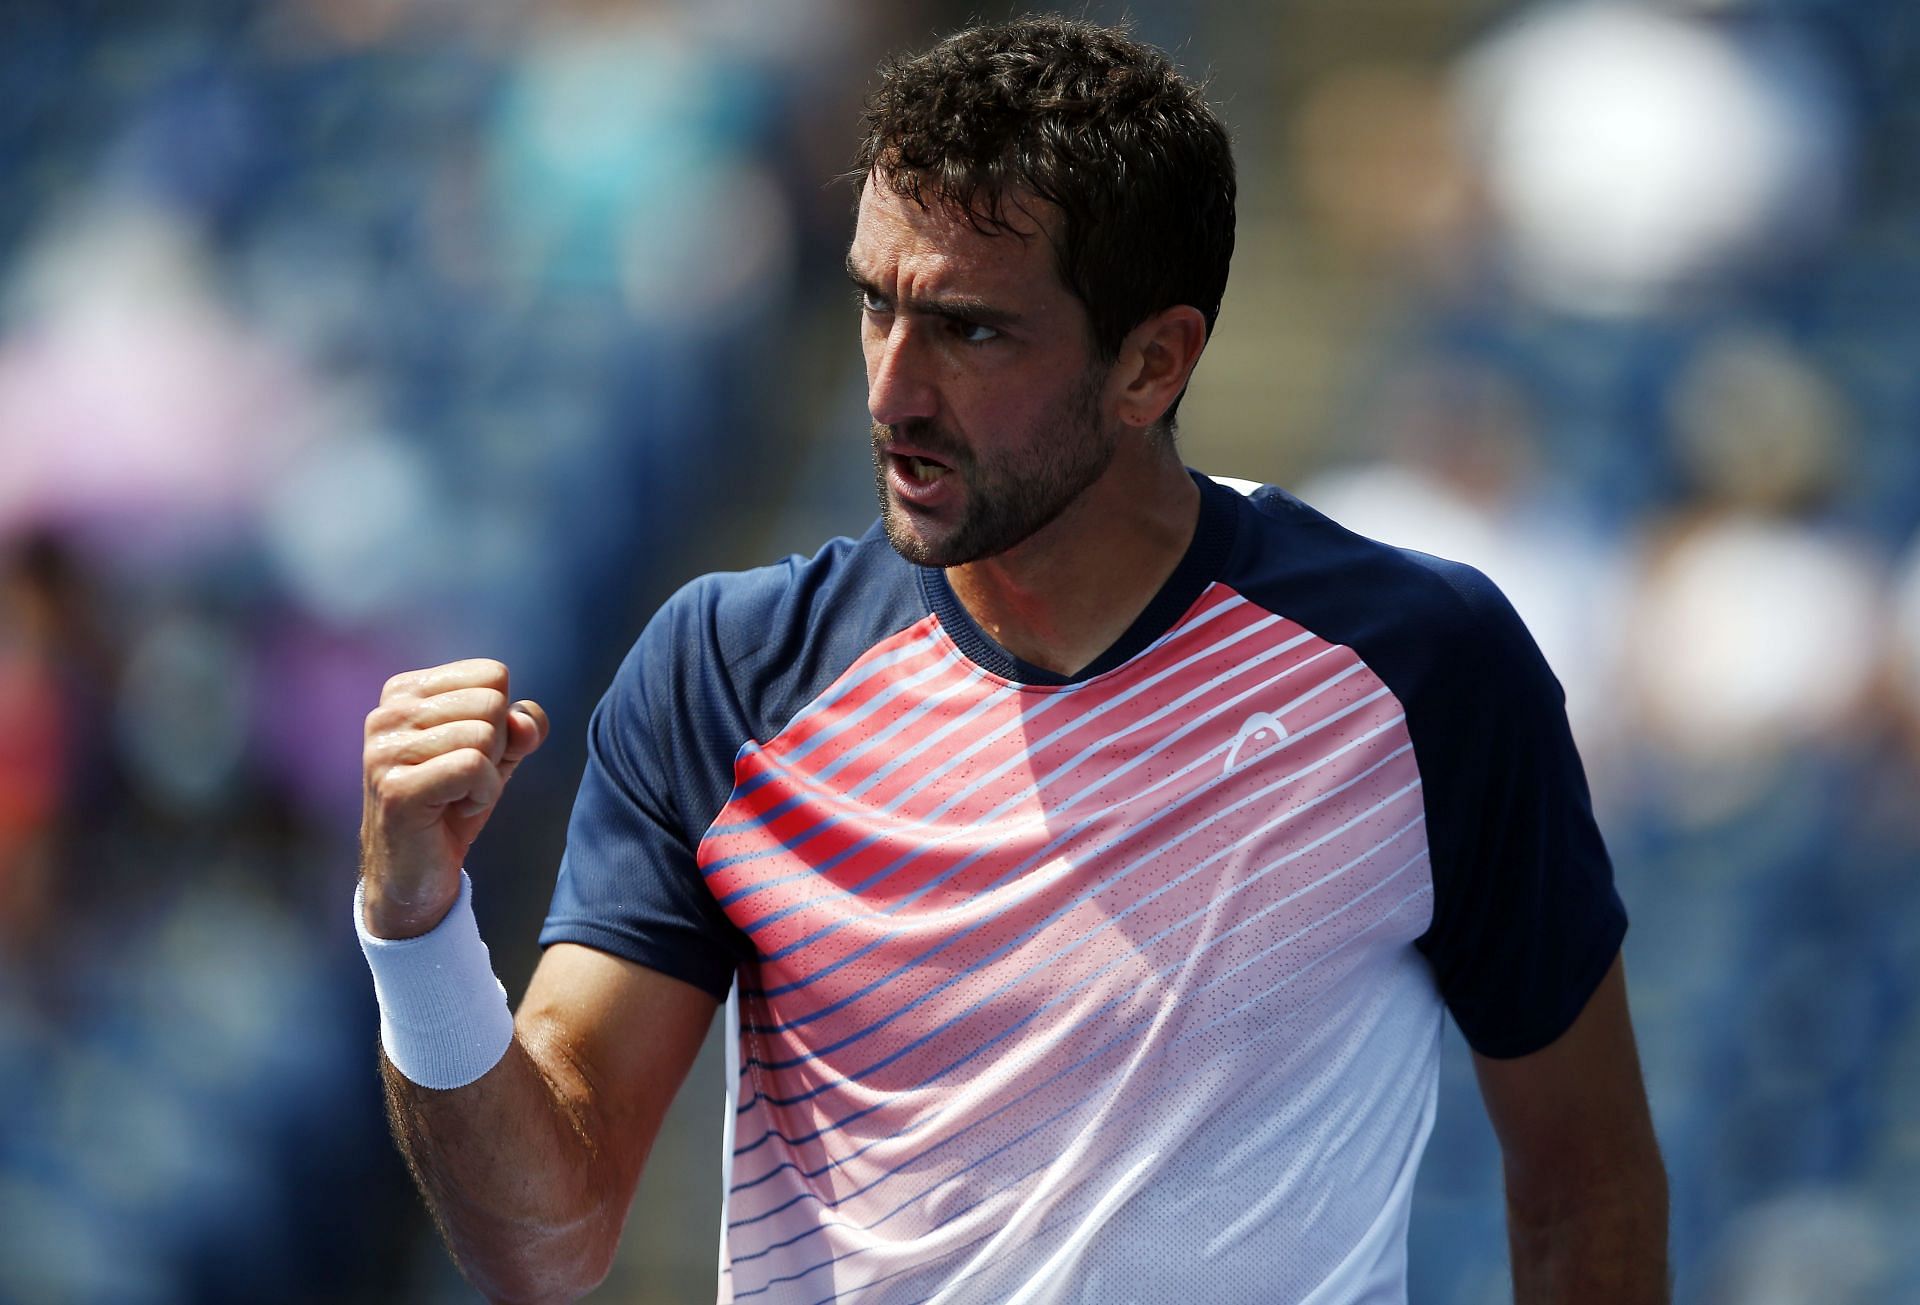 Marin Cilic was the 2021 St. Petersburg Open champion